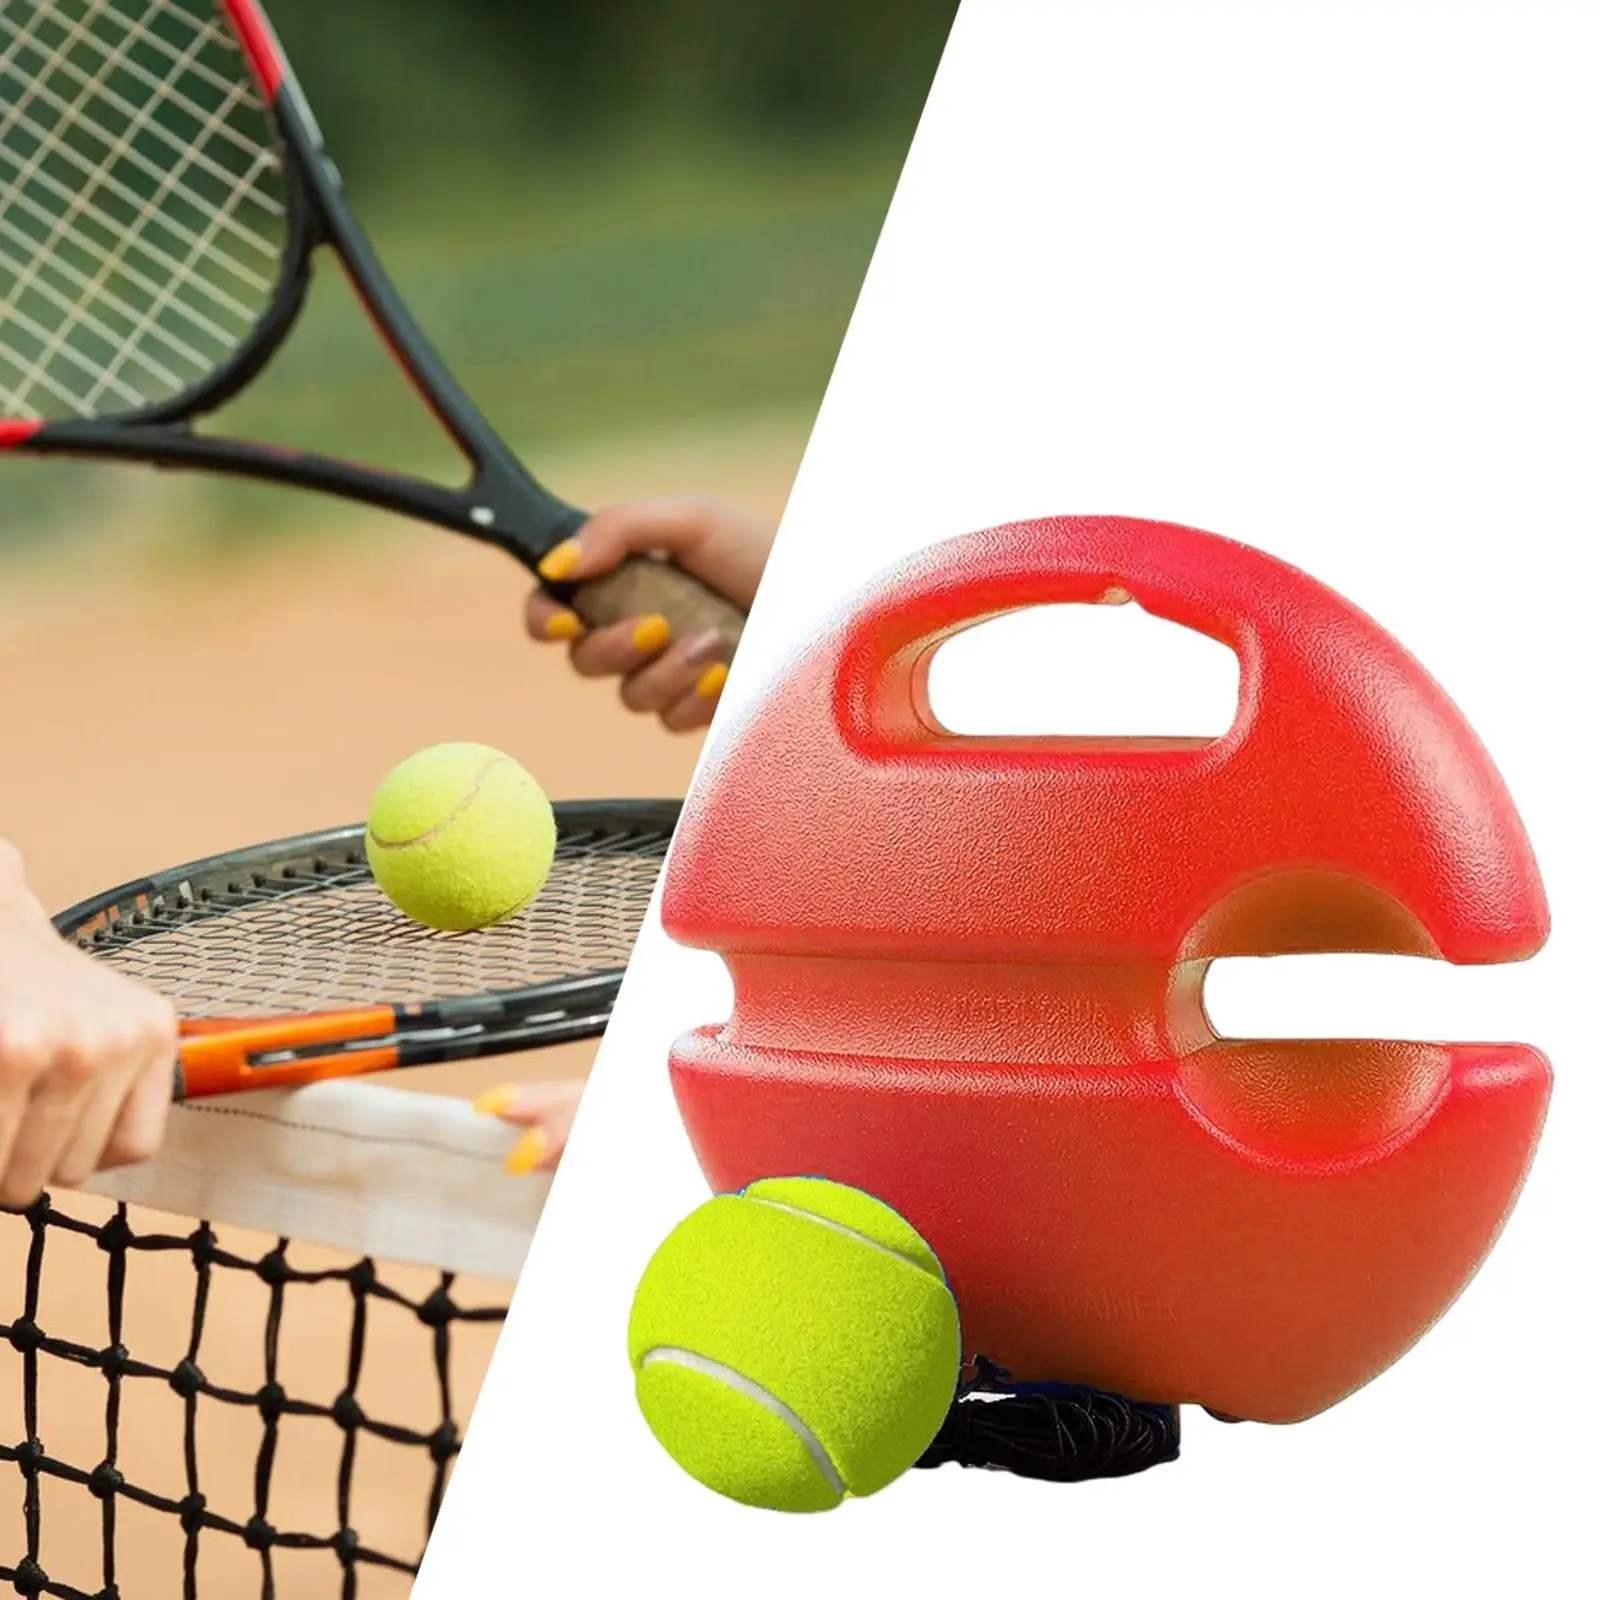 Tennis Trainer Partner Sparring Device Practice Tool for Outdoor Sports Adult Kids Single Player Enhances Skills Single Playing